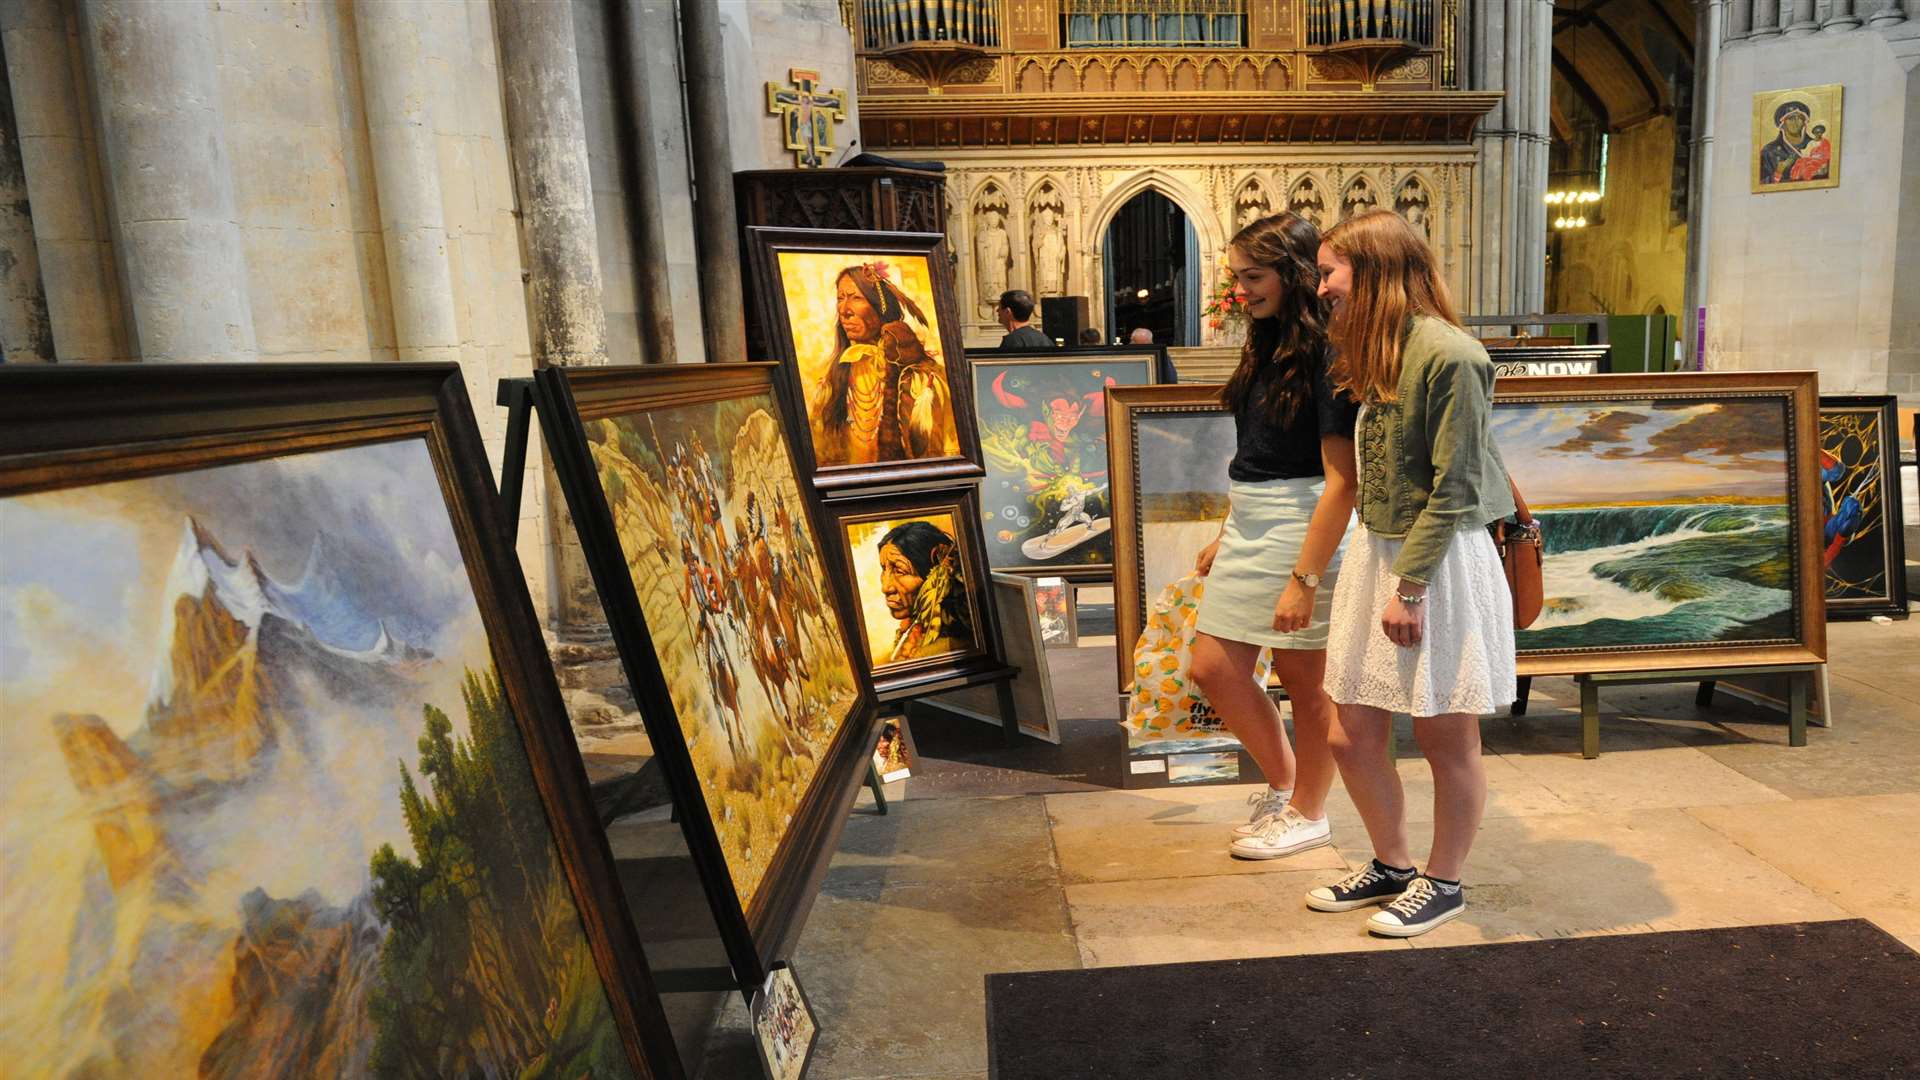 Vistitors to the cathedral check out Dennis Hussey's art exhibition